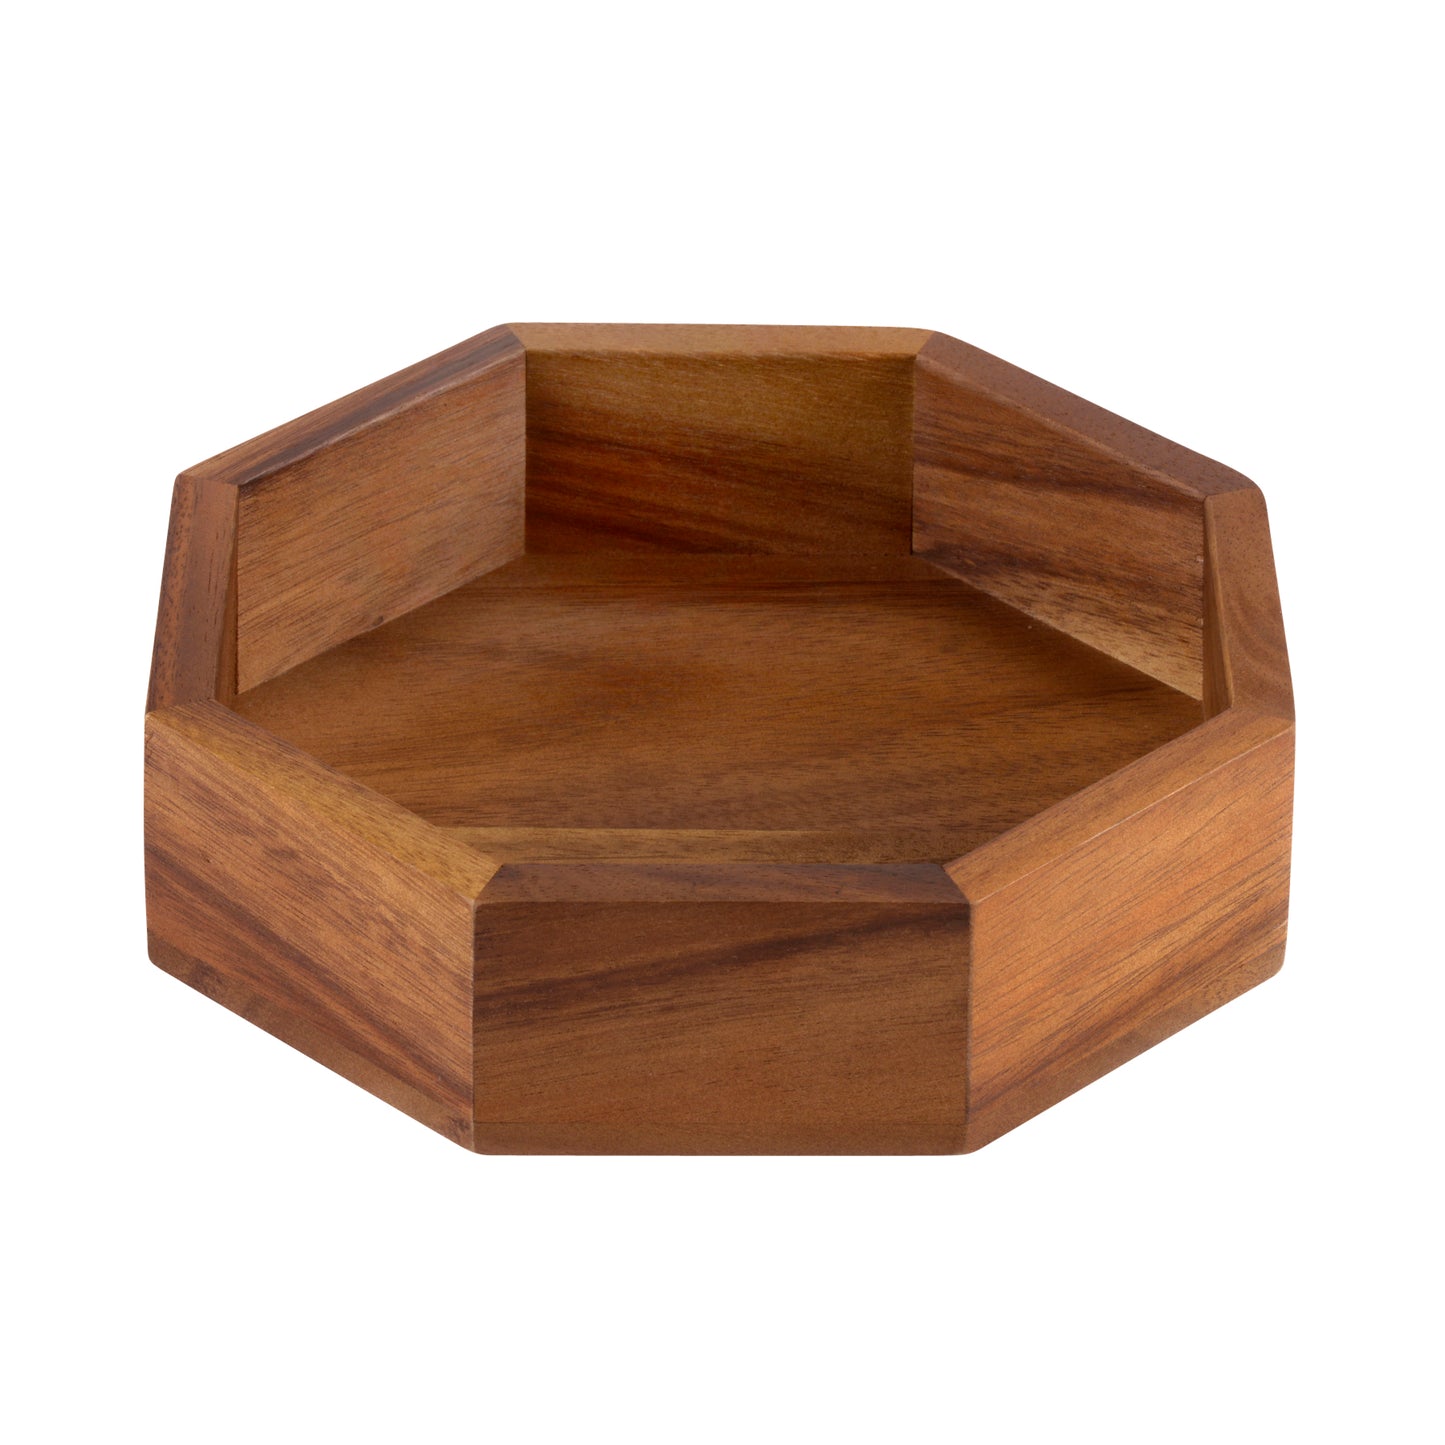 Octagon Candy/Nut Tray